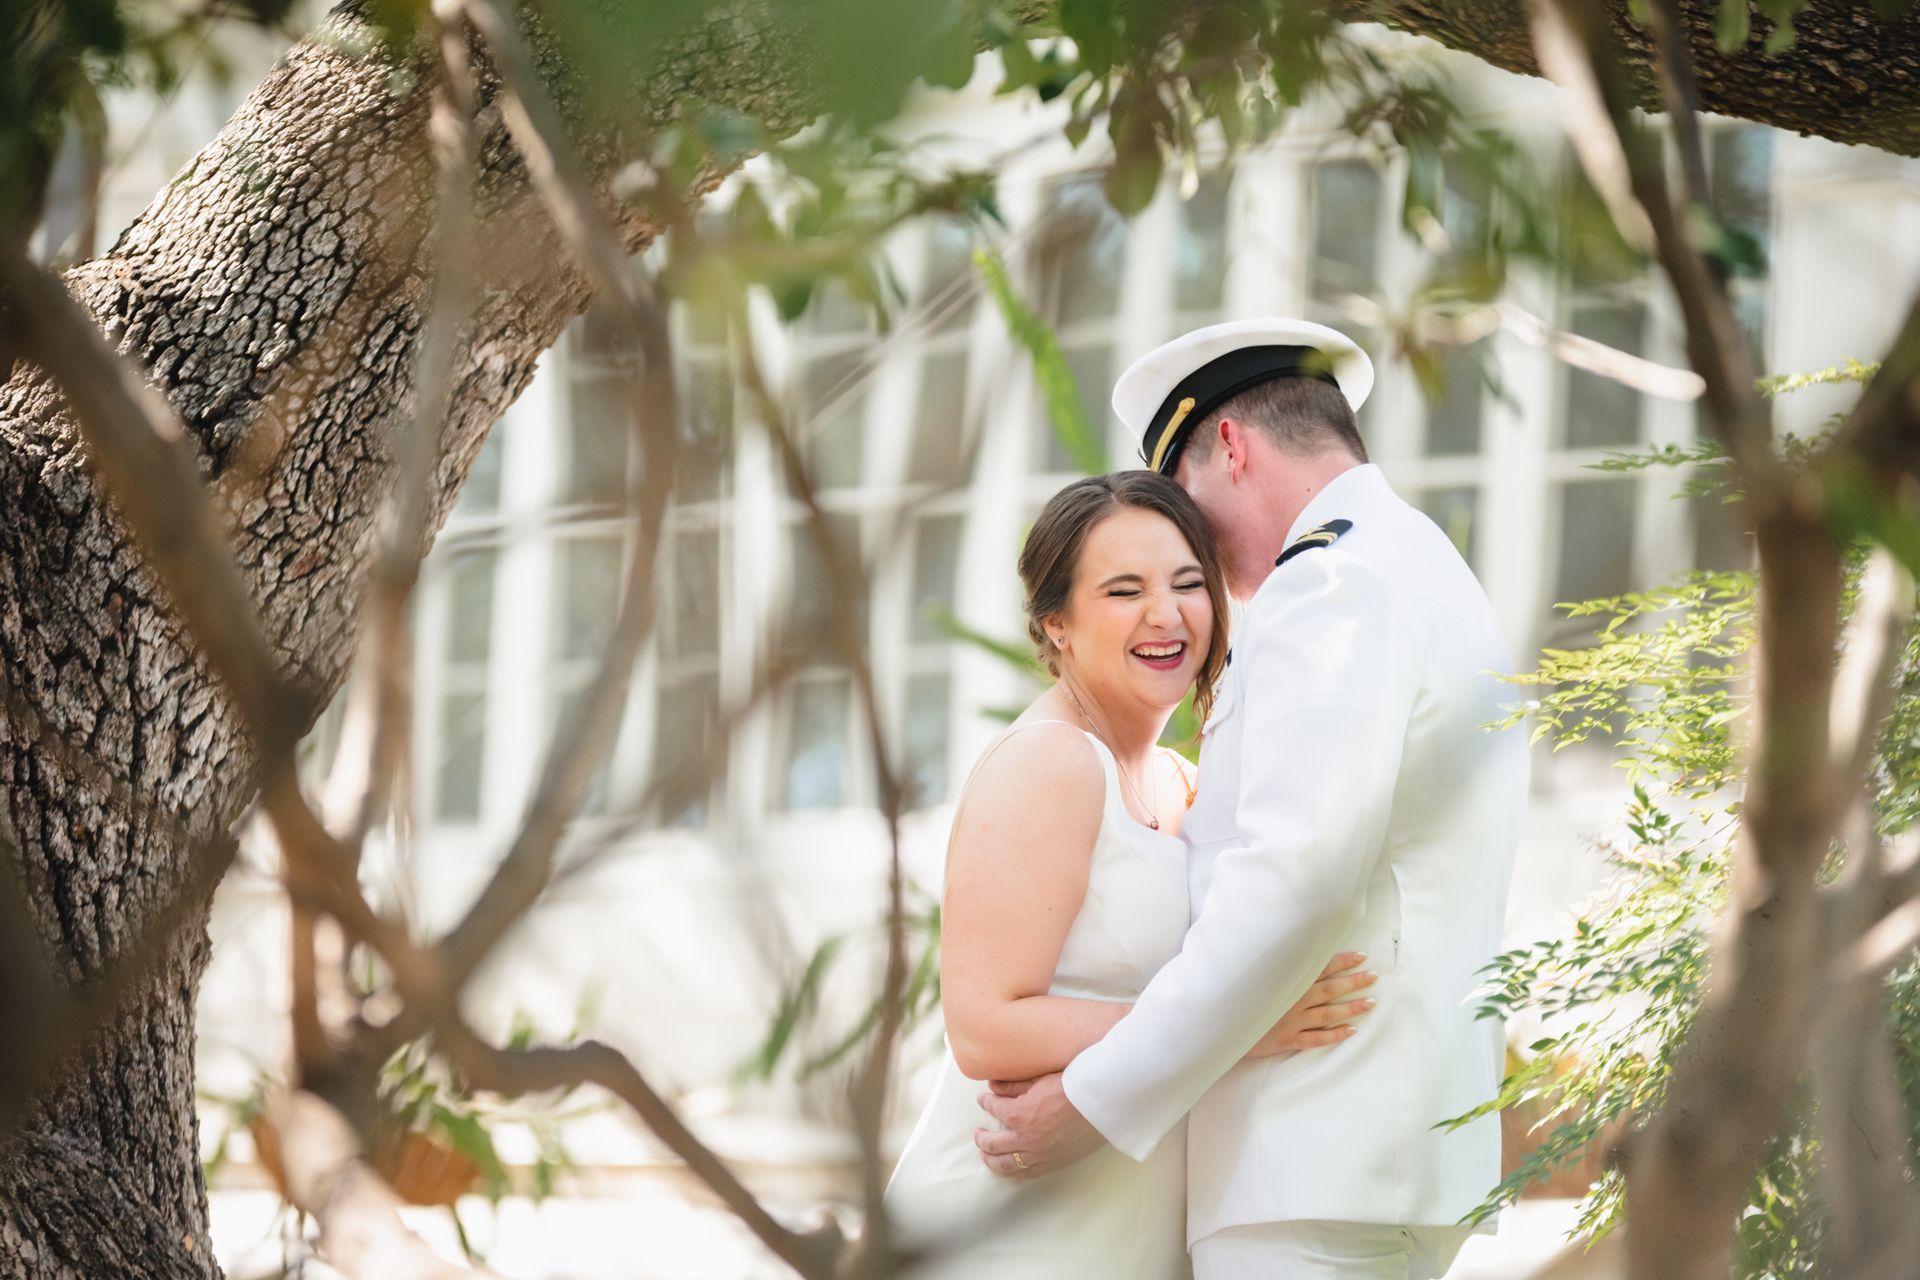 Bride and groom hold each other under a tress. The groom is wearing a white military uniform, the bride is smiling. 